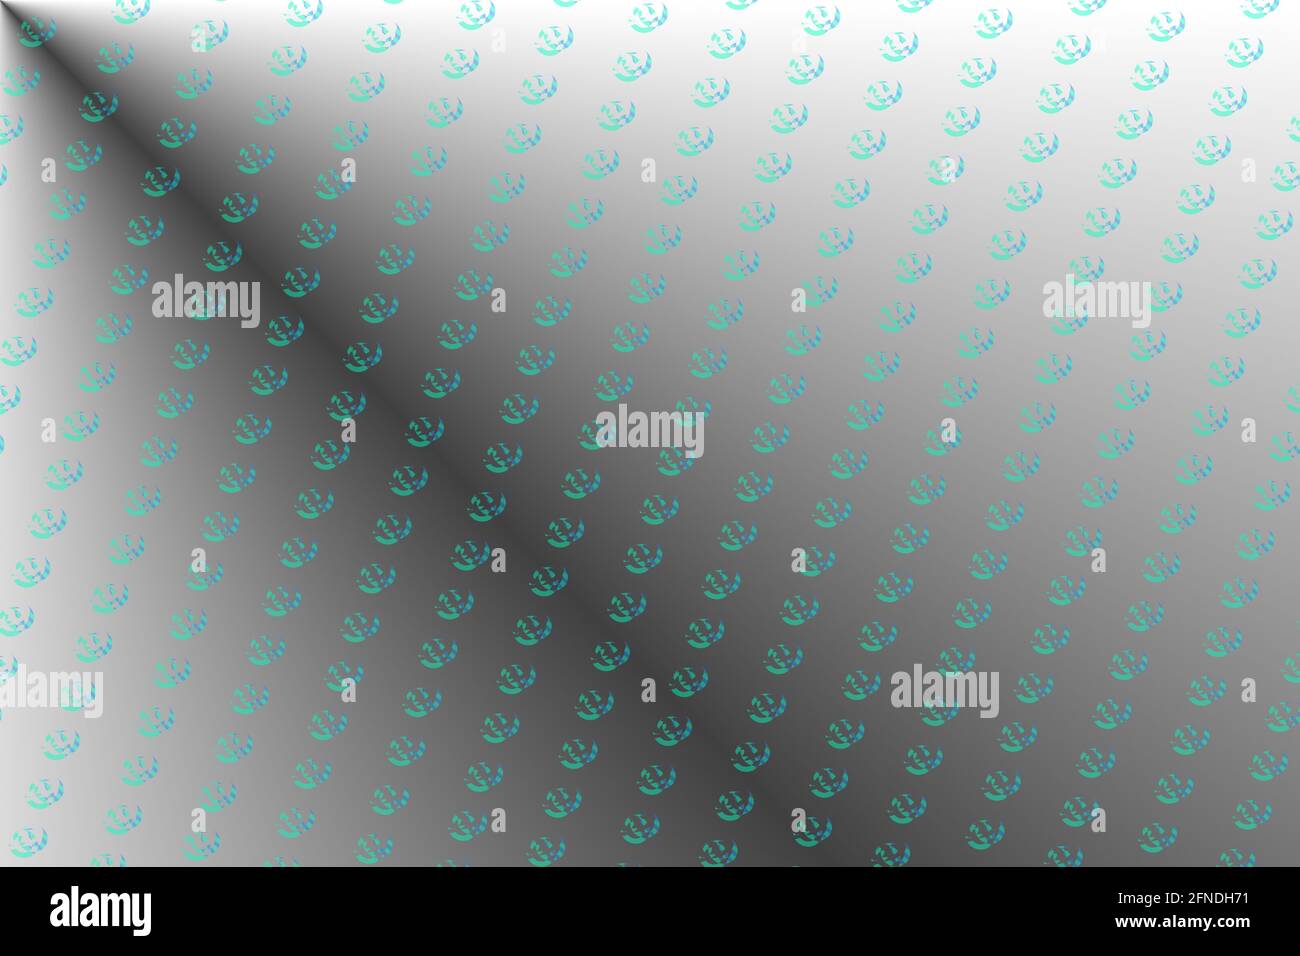 Focus ont he floating teal pattern with light and shades - Digital background pattern Stock Photo